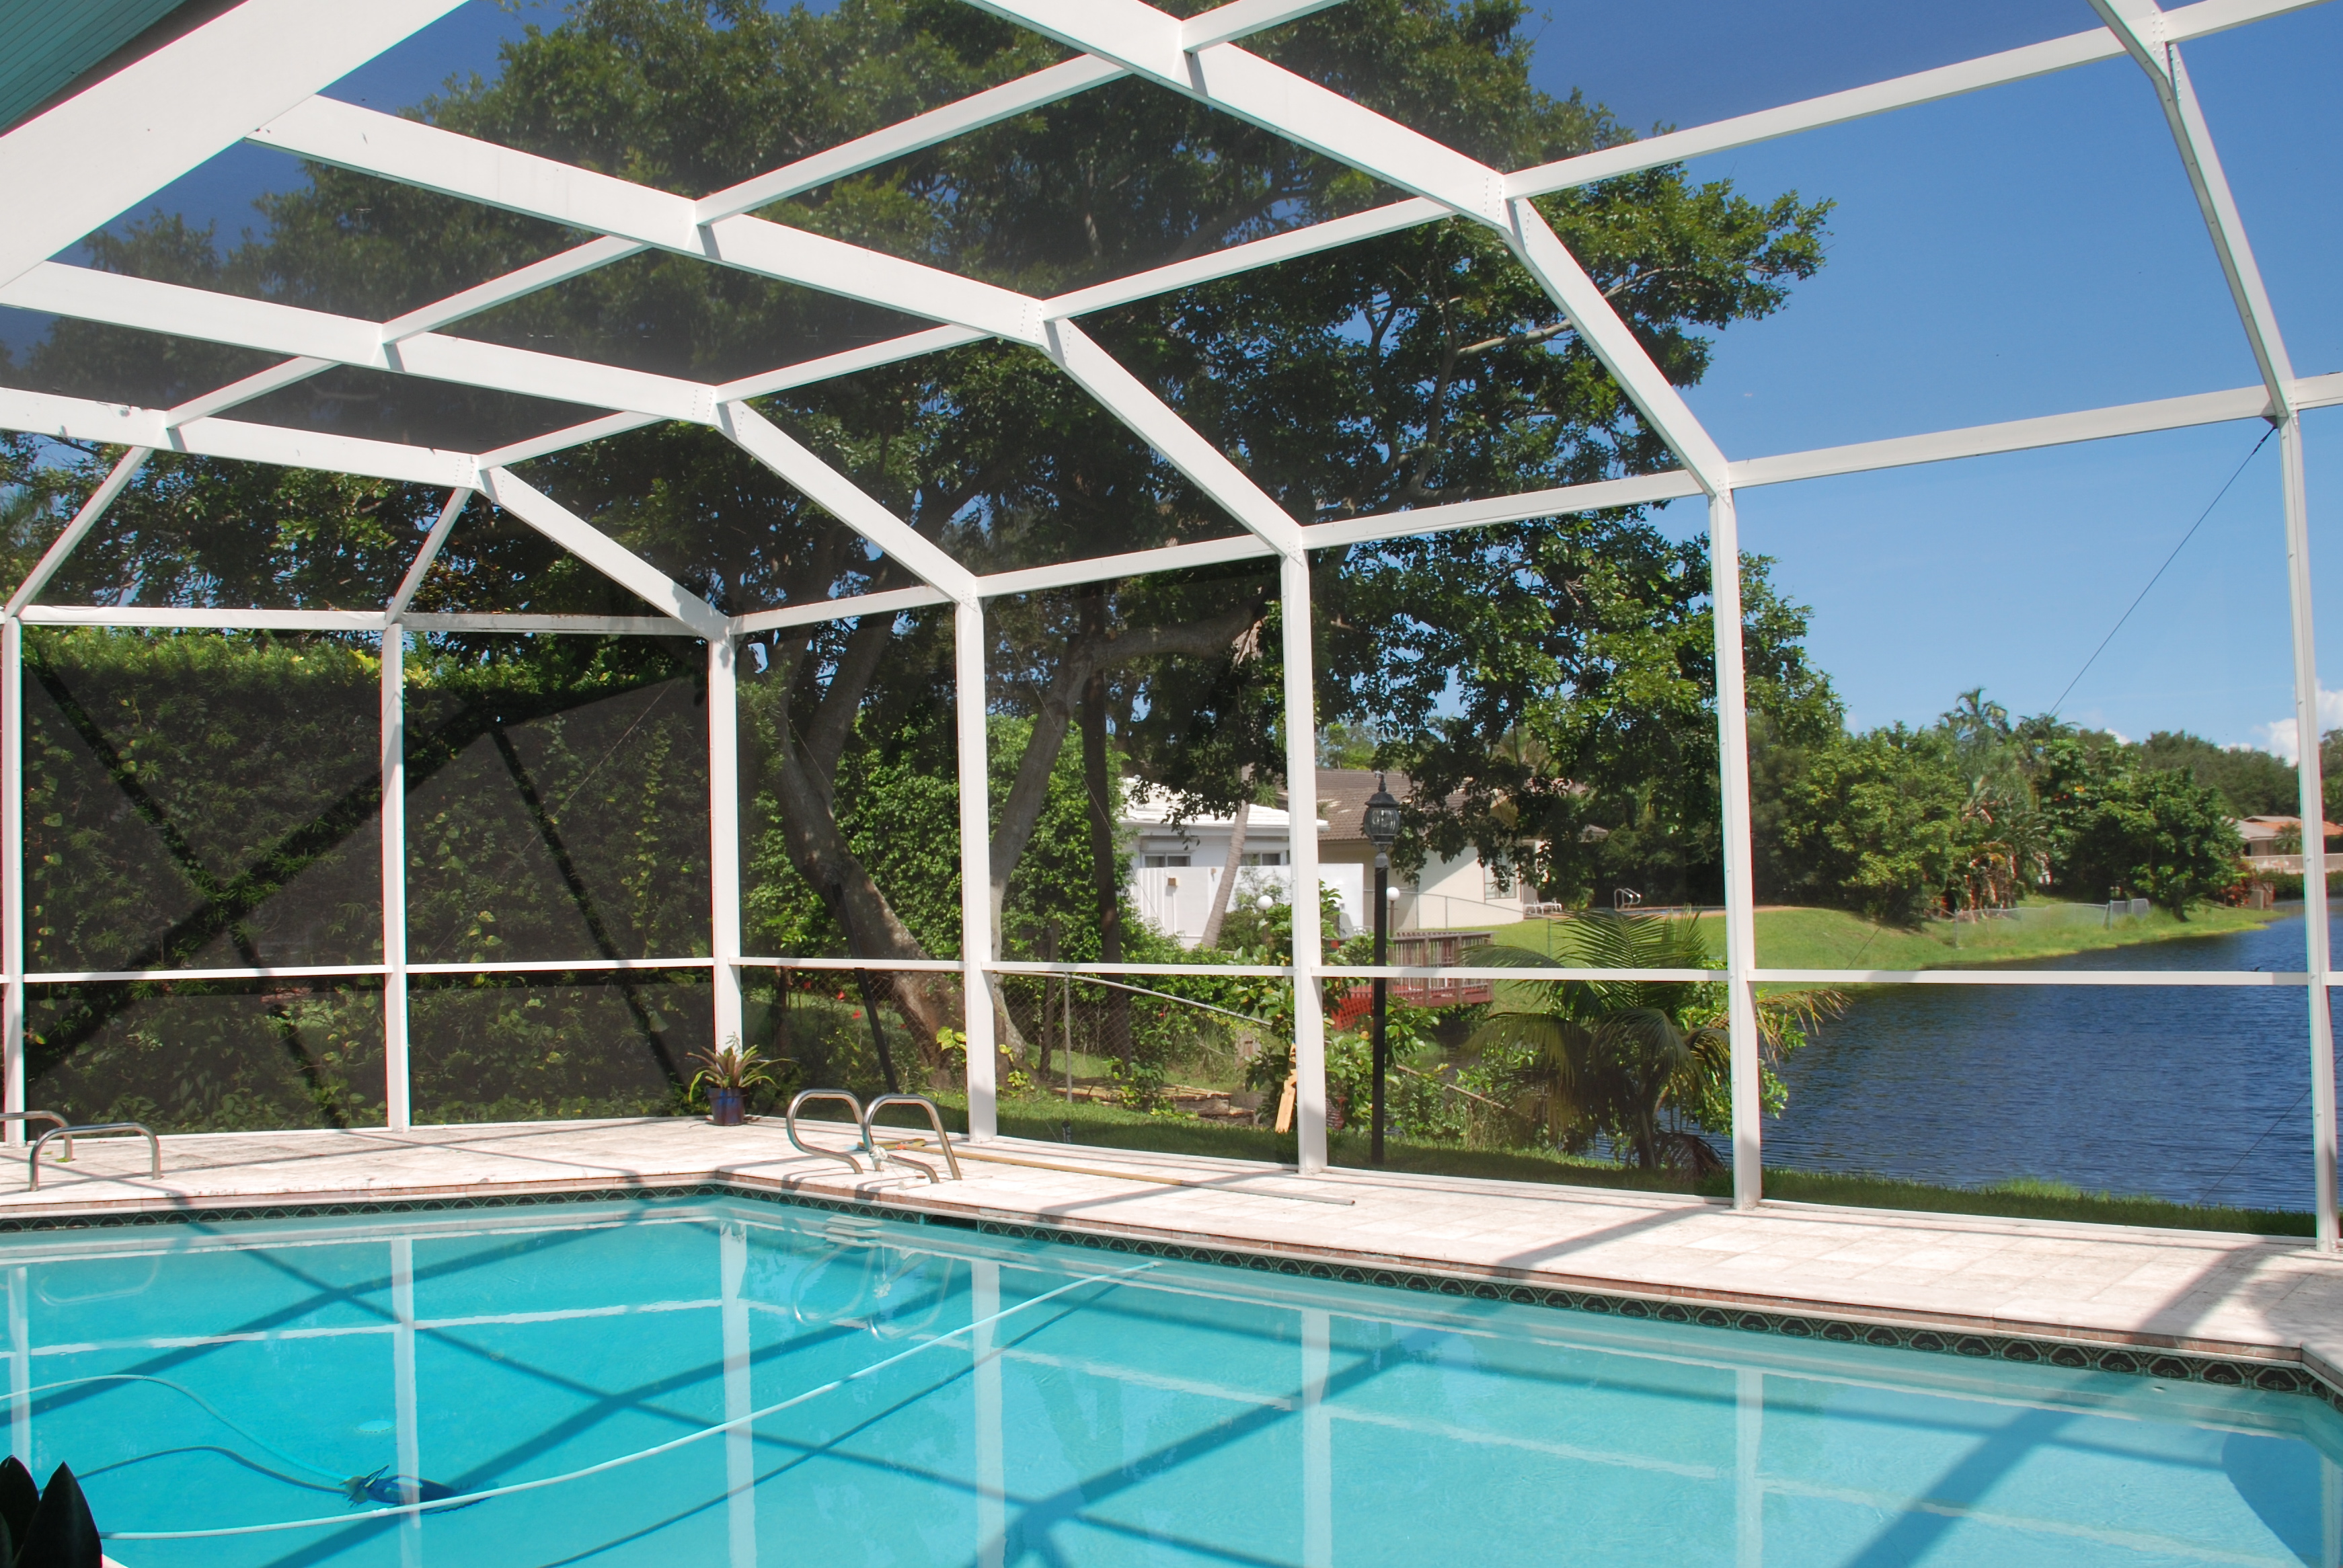 A screen pool enclosure from Venetian Builders, Inc., Miami. Heavier-gauge framing retains its delicate look but discreetly adds strength against storms and preserves views.